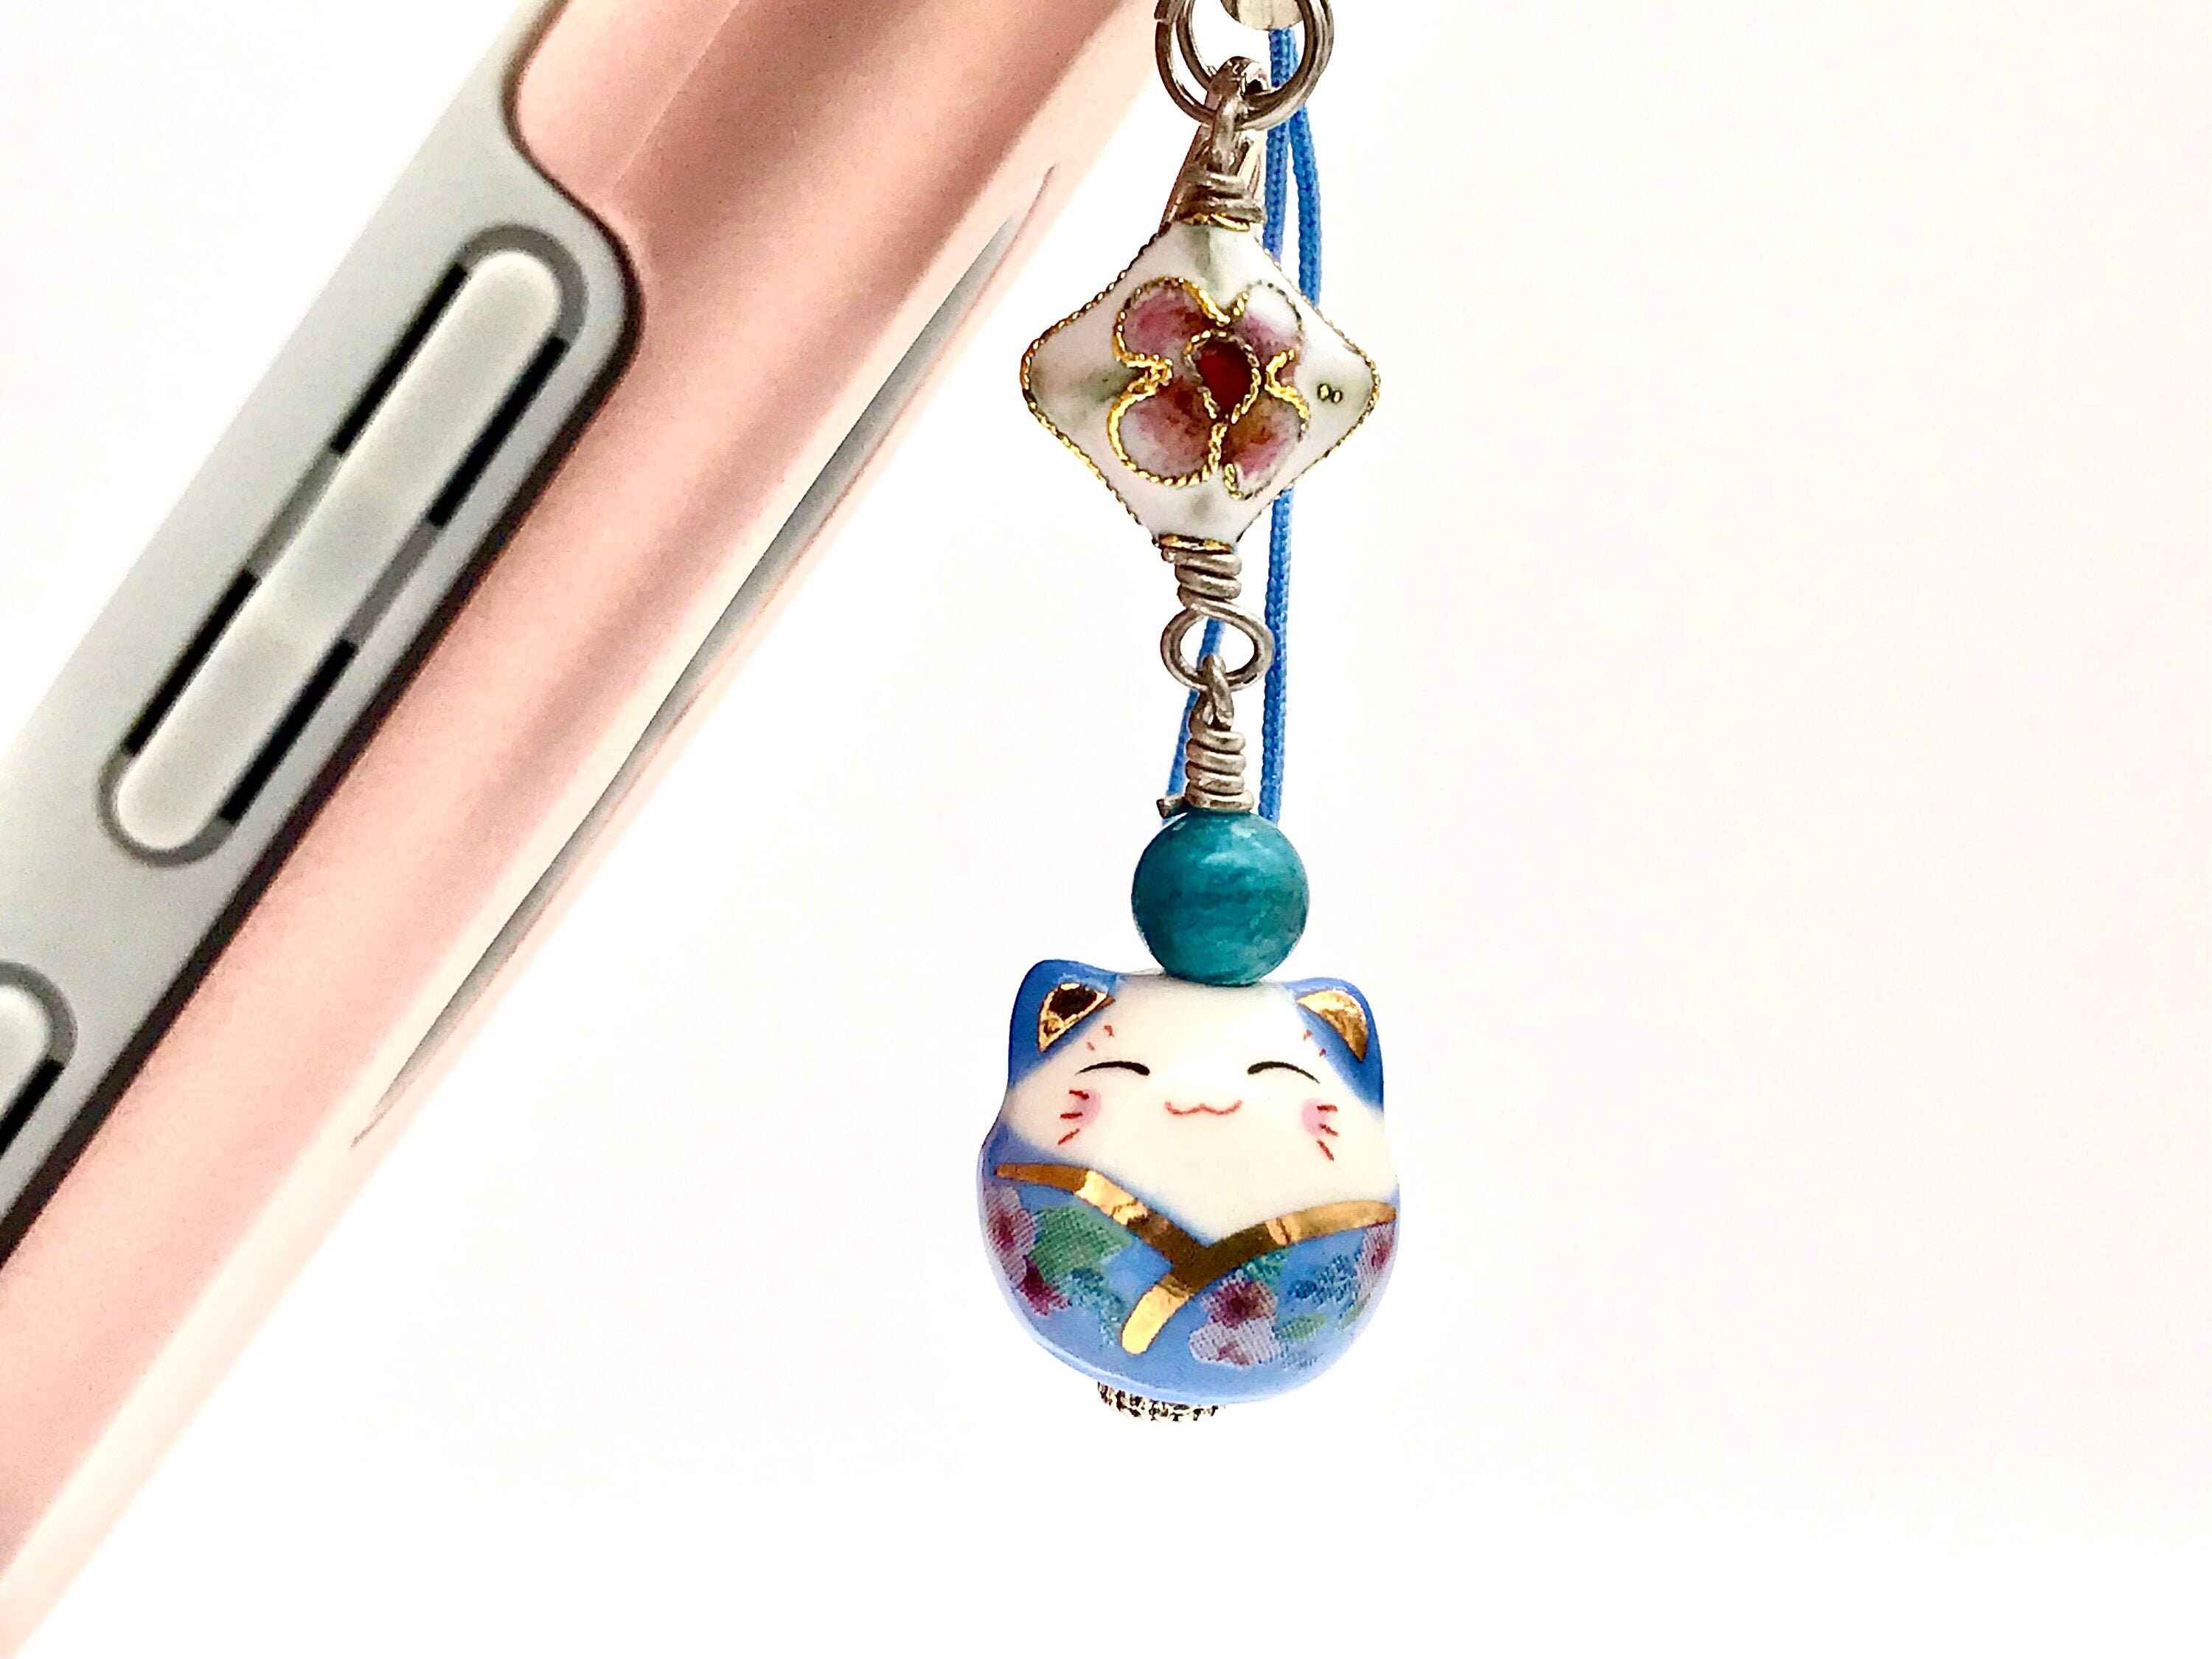 easy-attachment-tips-for-cell-phone-charms